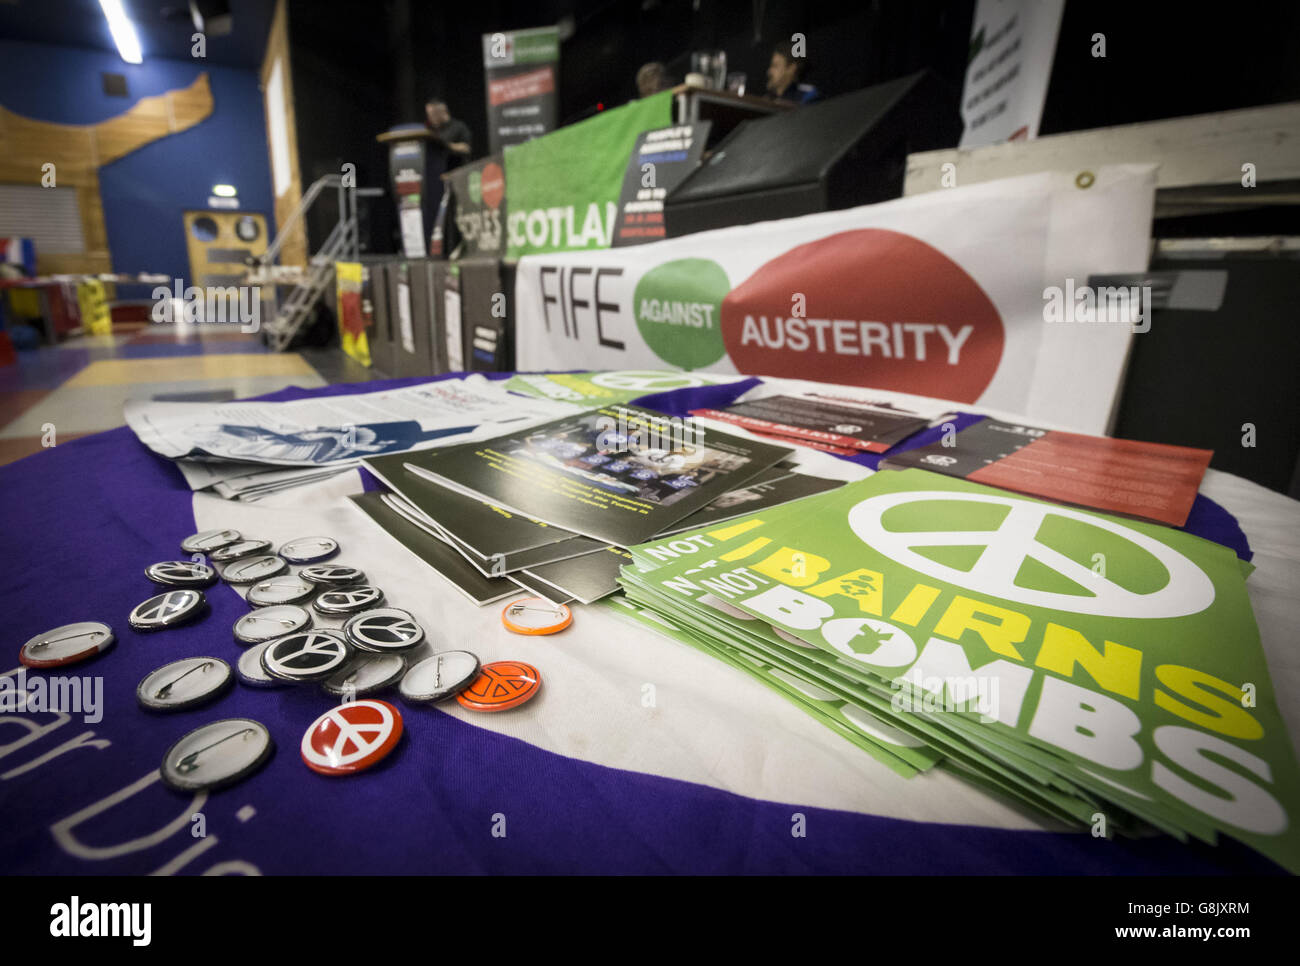 A stall at an anti-austerity rally at Vertigo Hall in Glasgow. The People's Assembly Scotland's annual meeting covered issues including public service cuts and council tax reform. Stock Photo